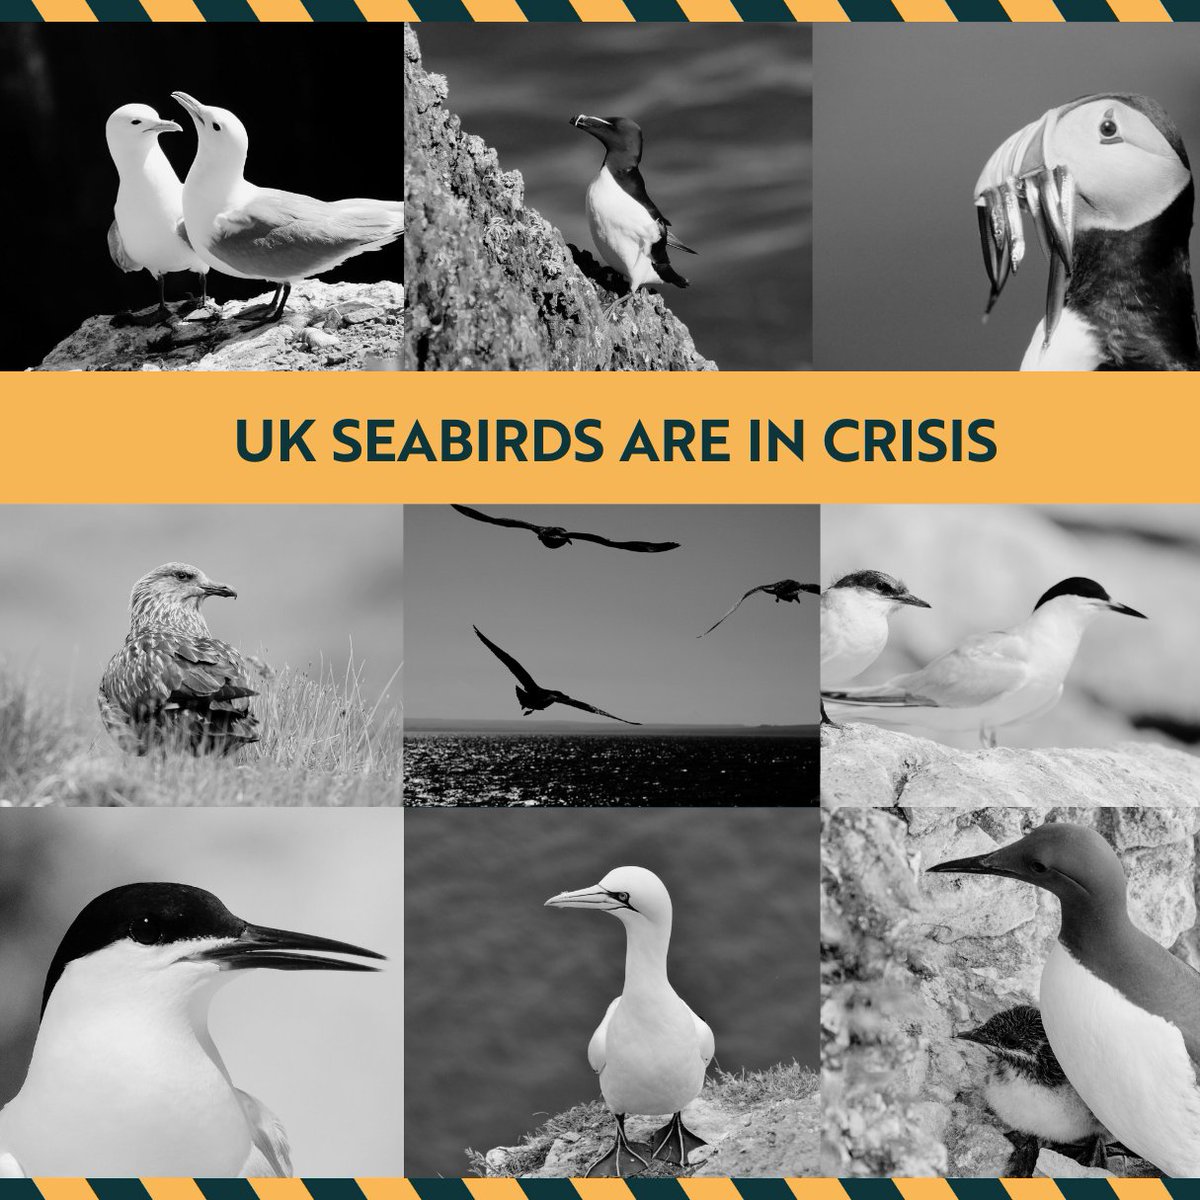 ⚠ NEW RSPB REPORT: UK seabirds are in crisis. The report, for the first time, quantifies the effects of recent avian flu outbreaks on our seabird populations. With 9 out of the 13 species surveyed declining, HPAI is a major threat alongside climate change, overfishing & more.